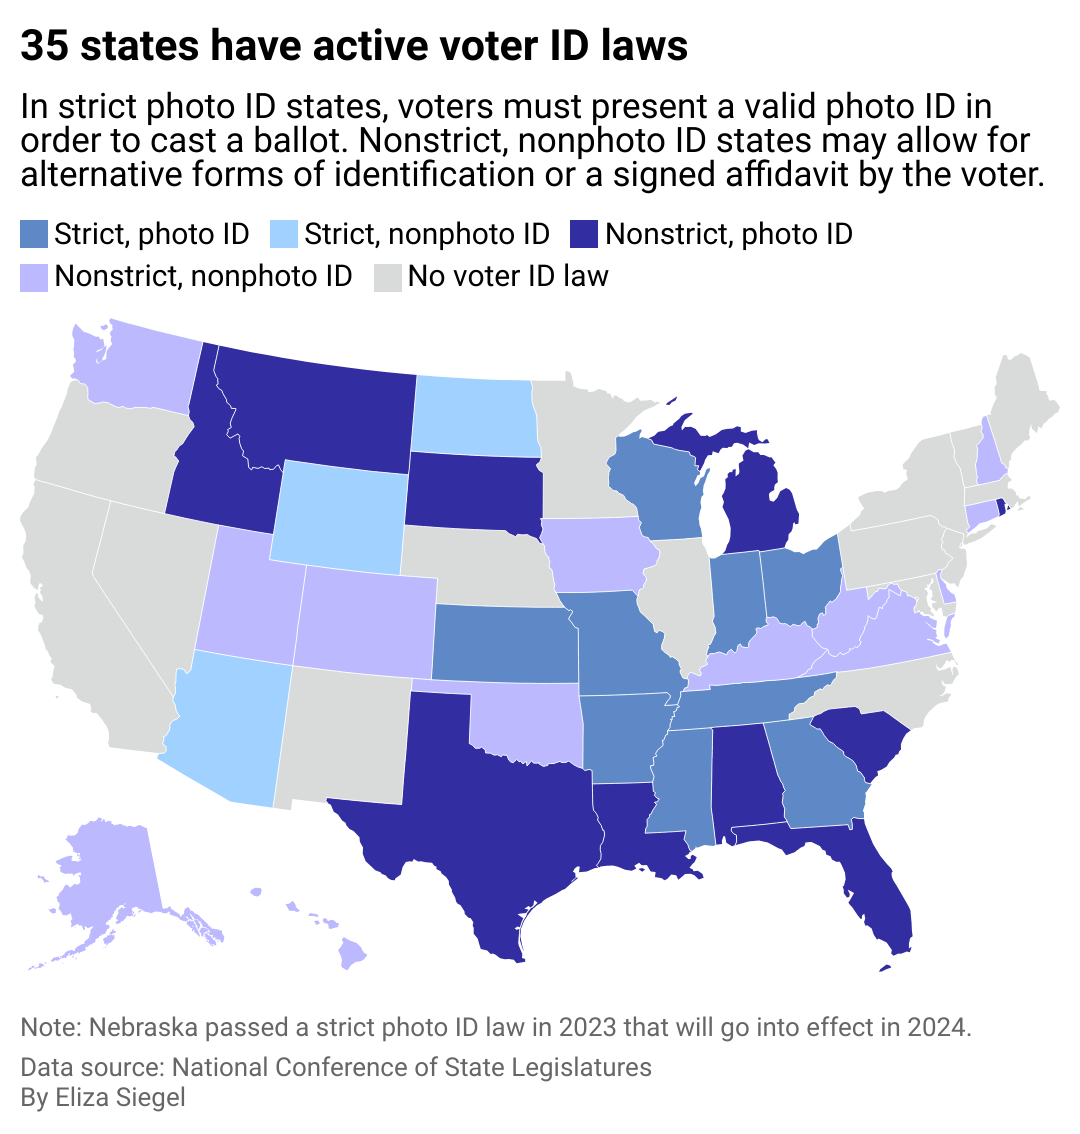 This map of the U.S. shows the 35 states that have active voter ID laws. In strict photo ID states, voters must present a valid photo ID in order to cast a ballot. Non-strict, non-photo ID states may allow for alternative forms of identification or a signed affidavit by the voter.